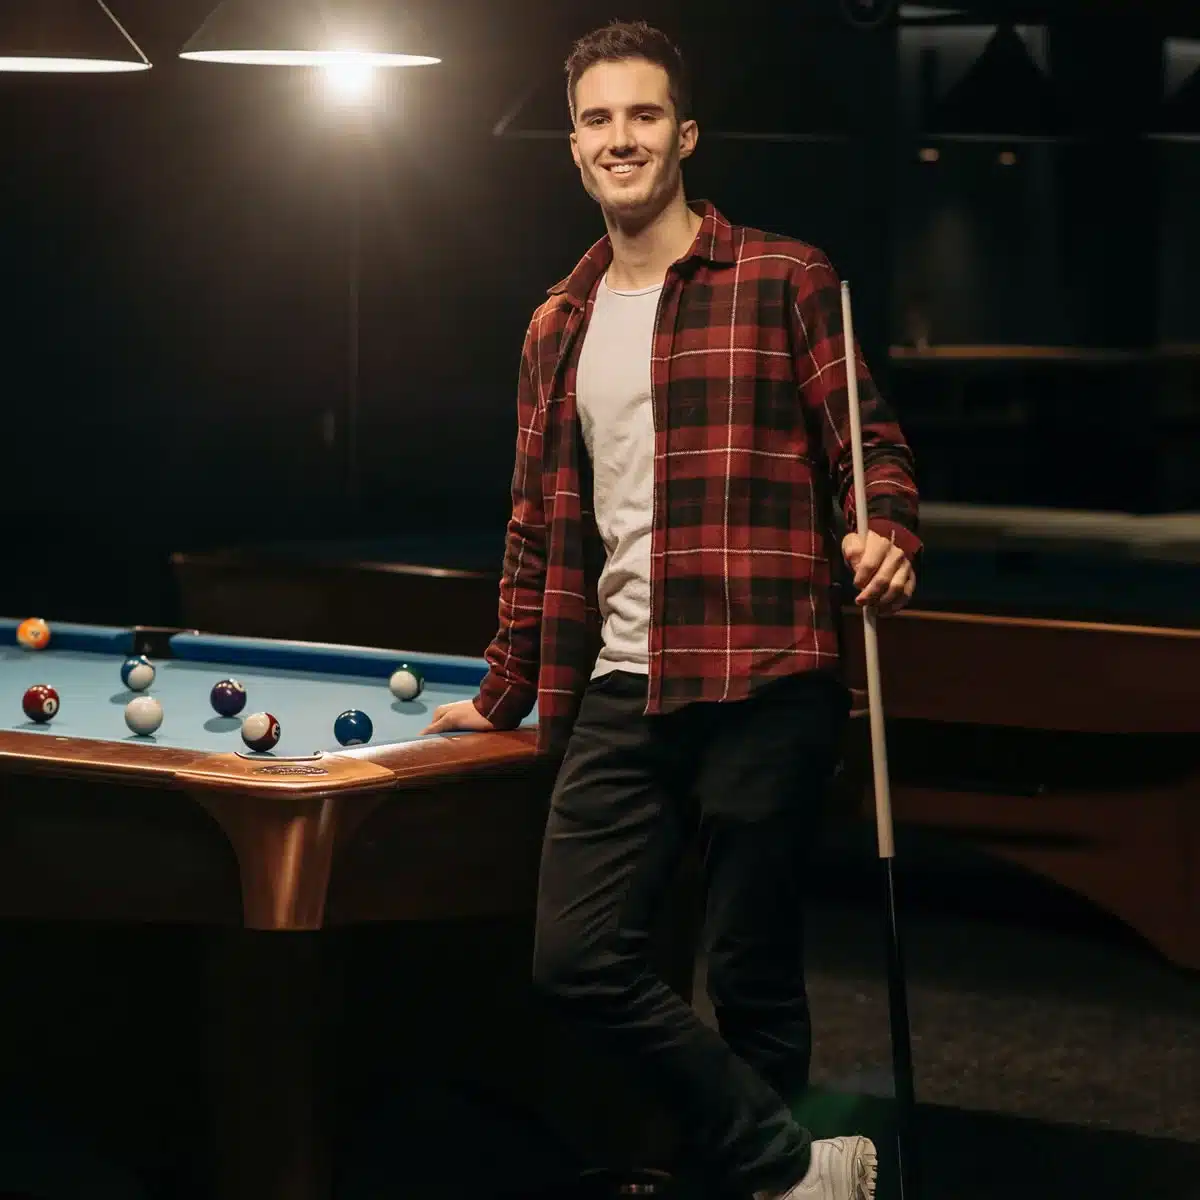 How heavy is a professional pool table